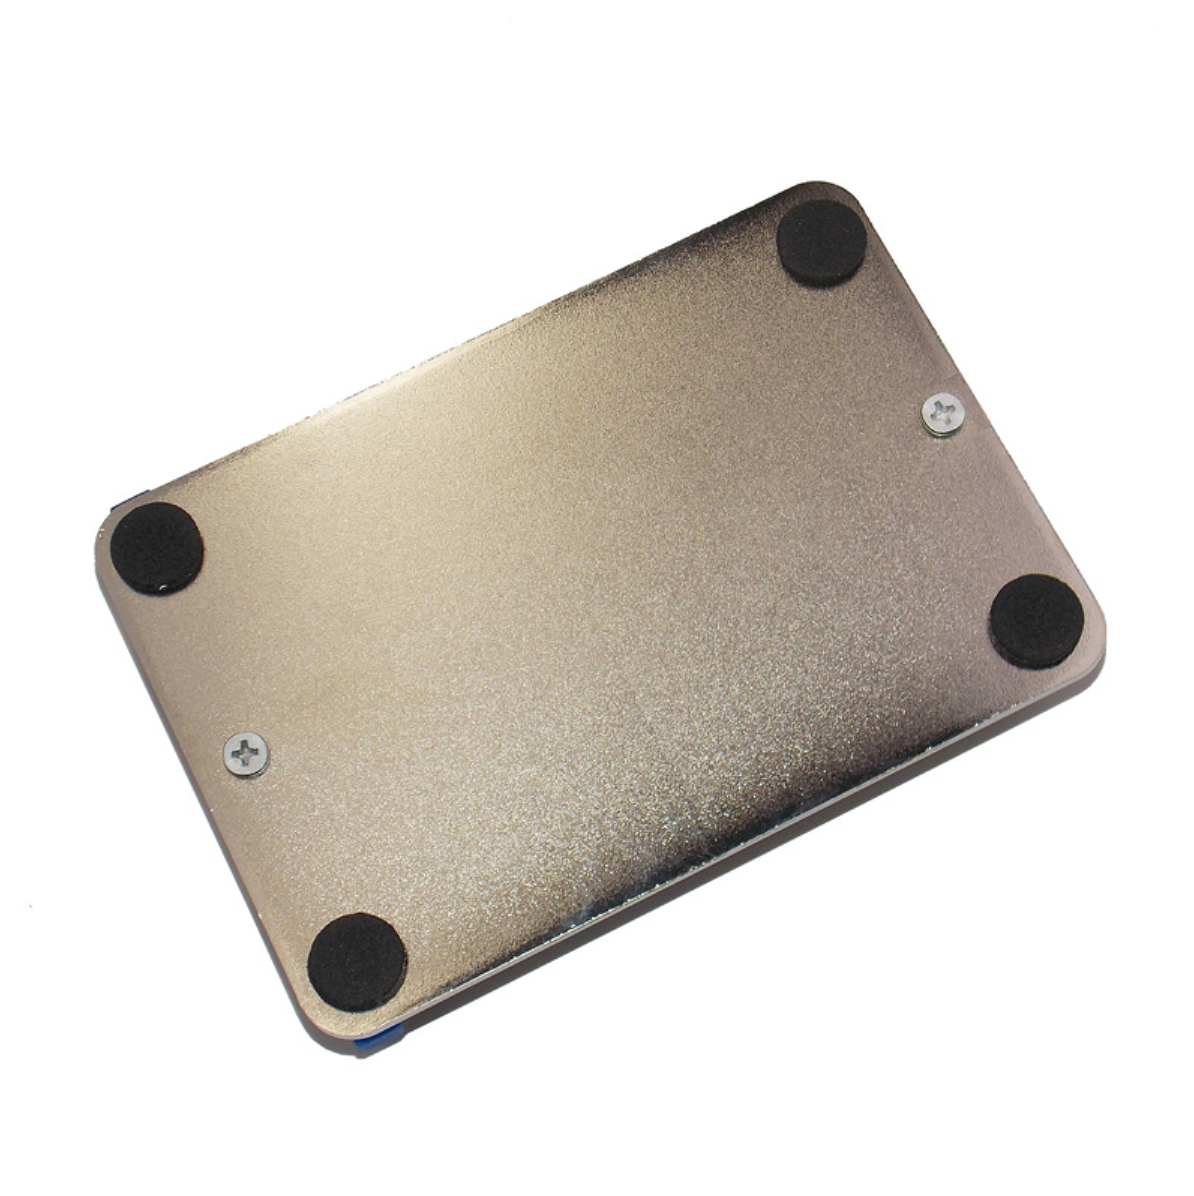 Phaser FPV Stainless Steel PCB Holder TE-07A